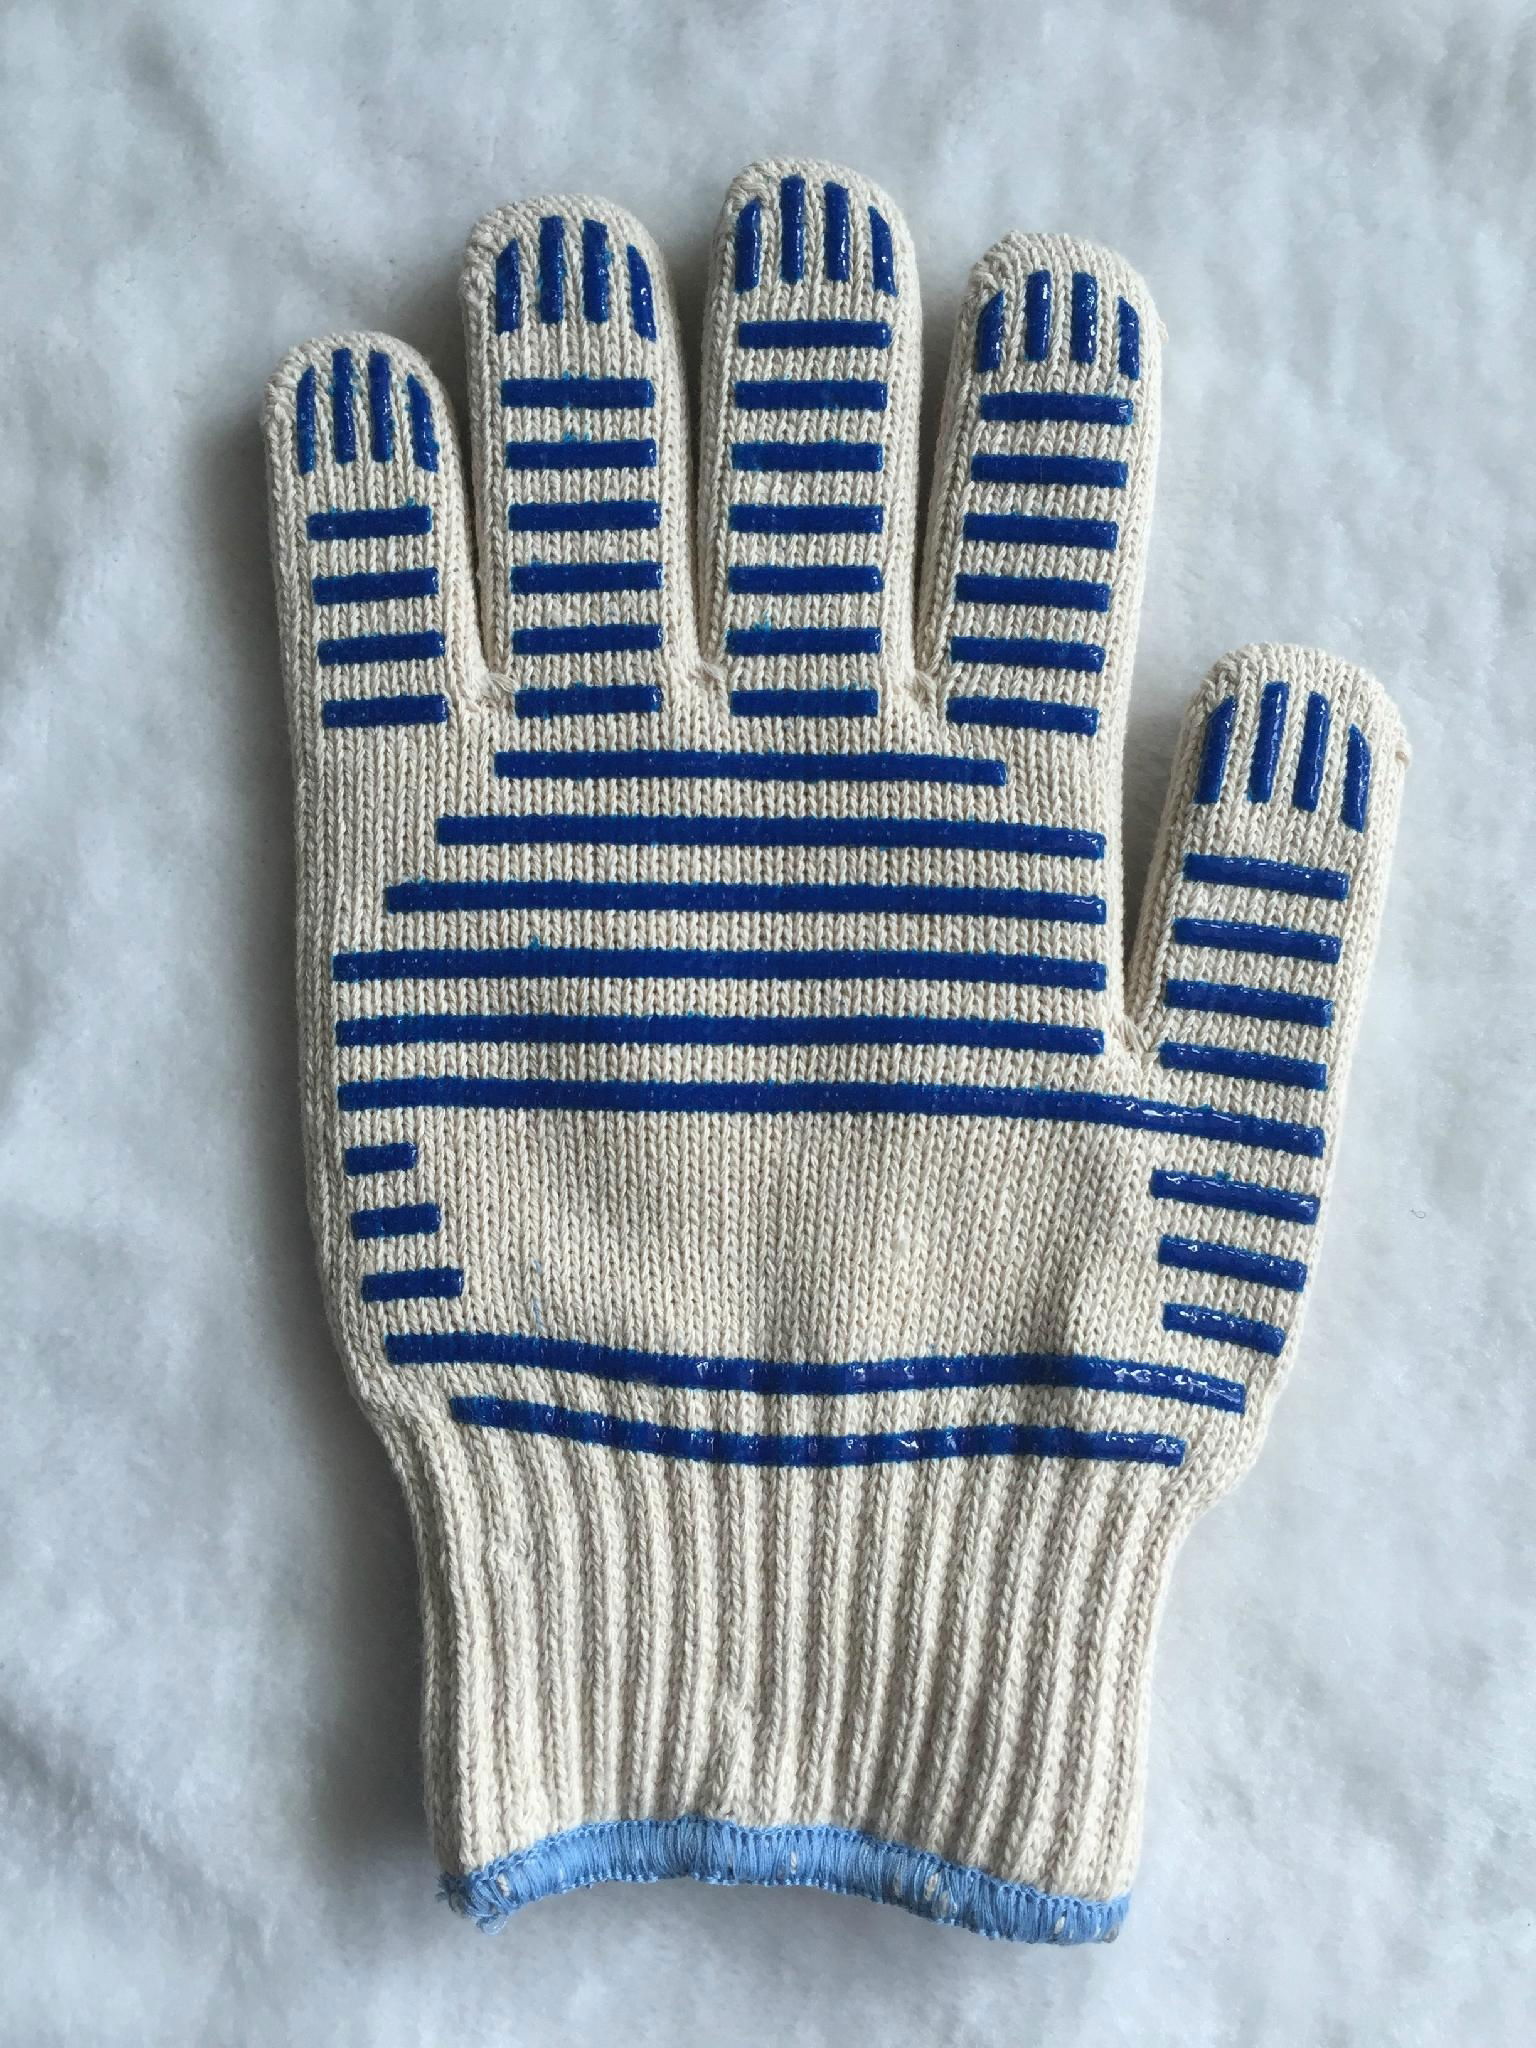 oven usage and dotted style oven usage bbq cotton glove